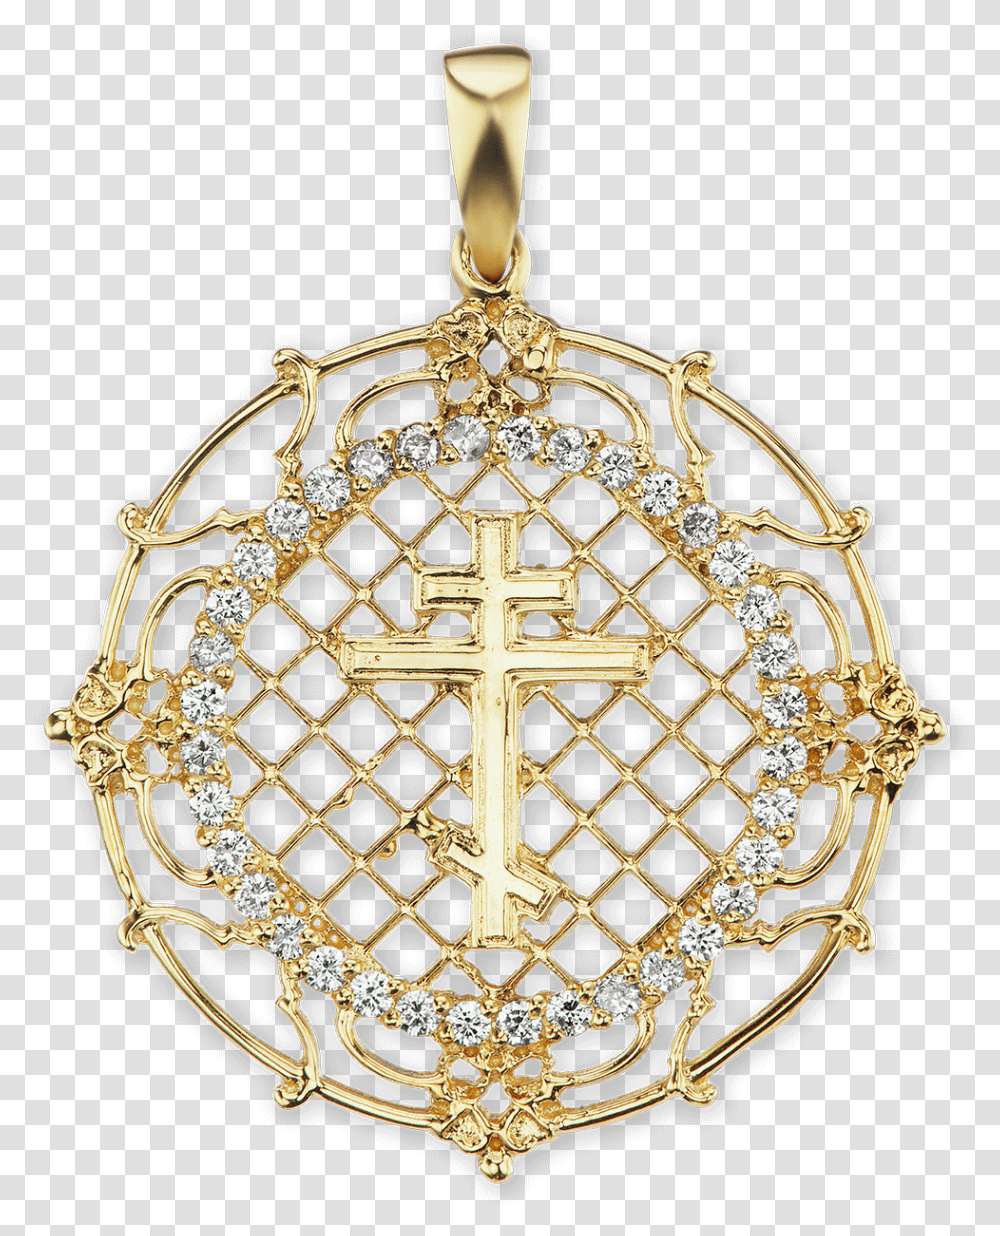 Gold Round Orthodox Cross Pendant With Diamonds Locket, Chandelier, Lamp, Accessories Transparent Png